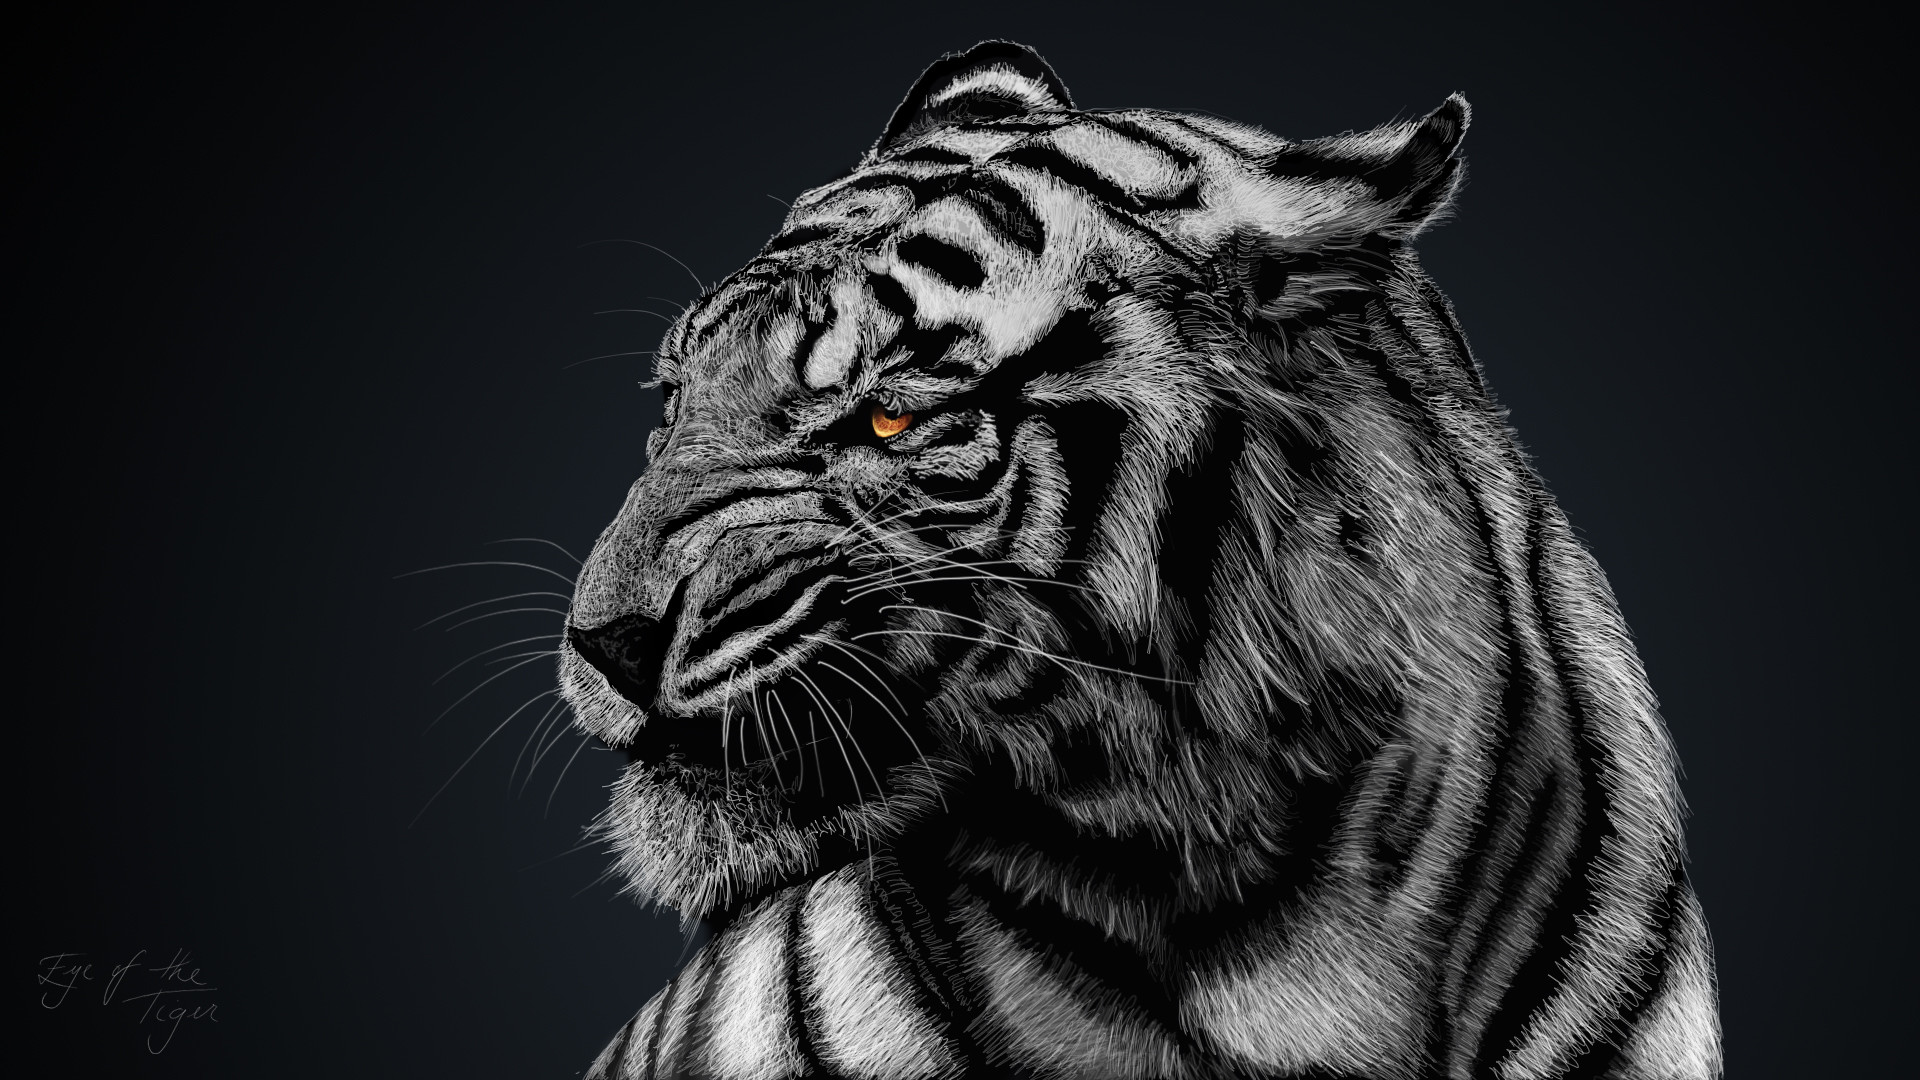 1920x1080 High Resolution Tiger Black and White HD Wallpaper Full Size .